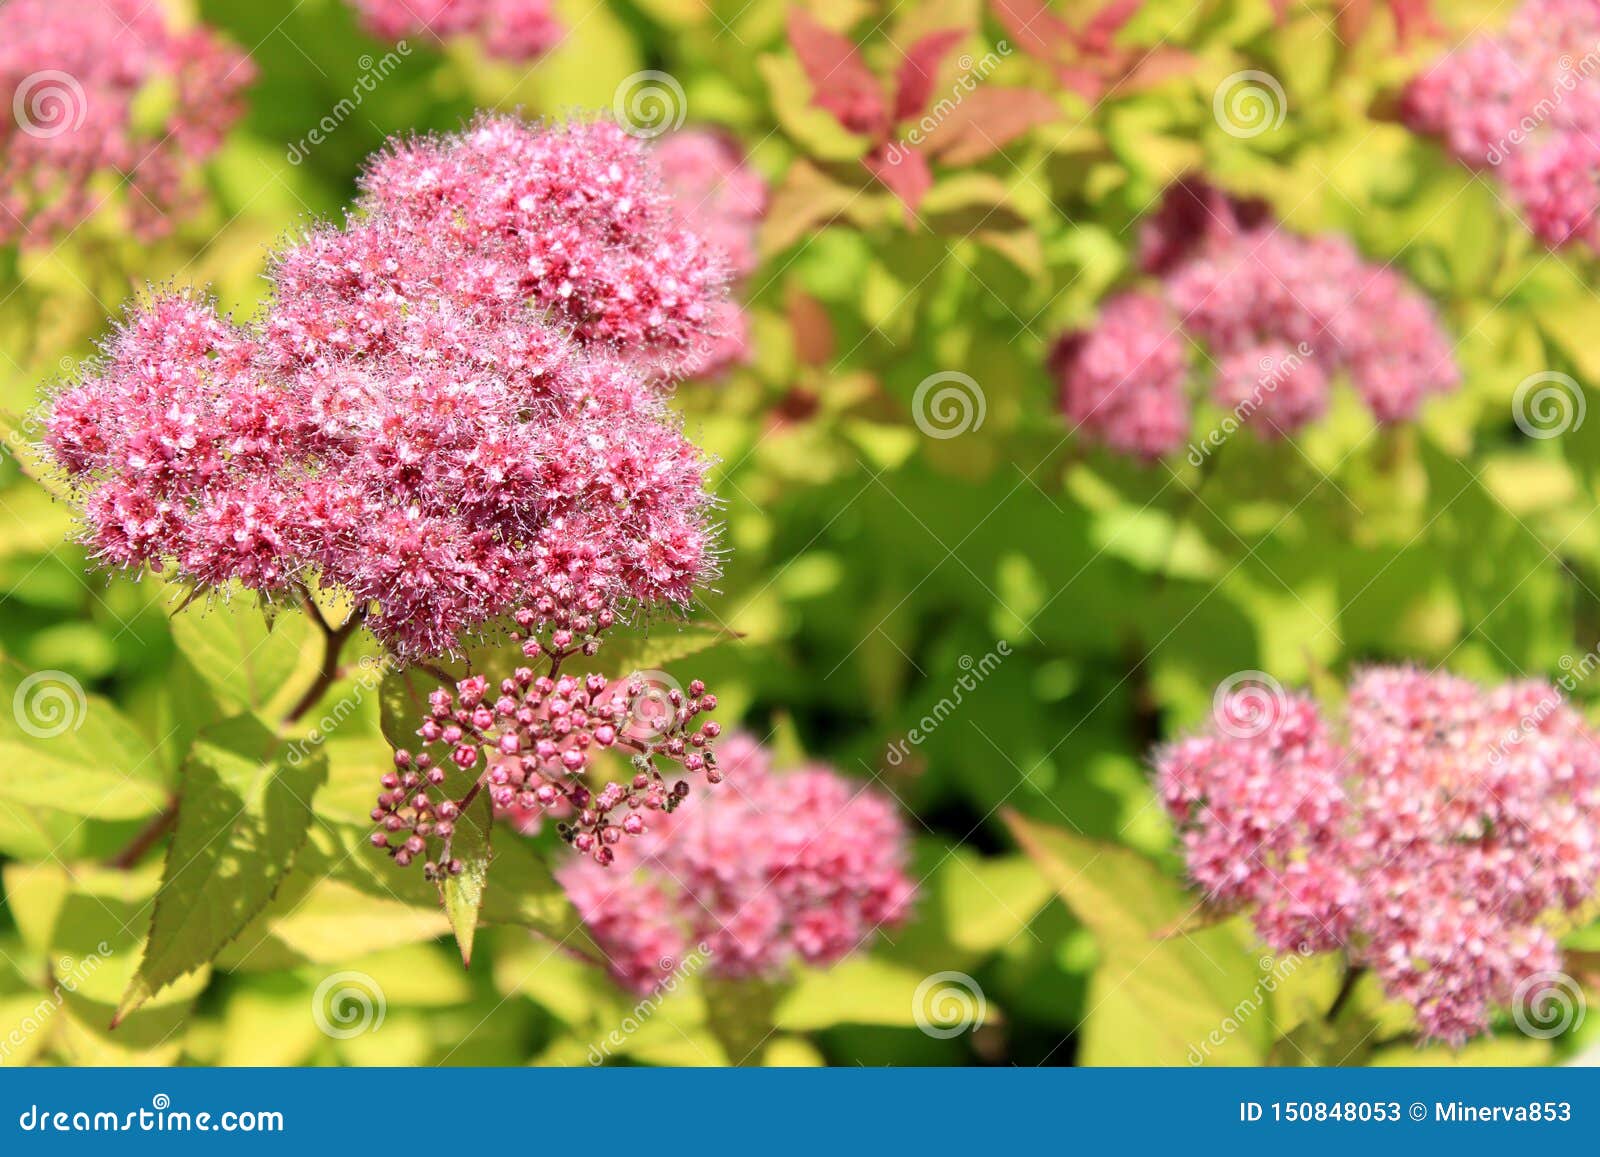 japanese spirea or korean, is a plant in the family rosaceae. synonyms of the name of the species spiraea bumalda.